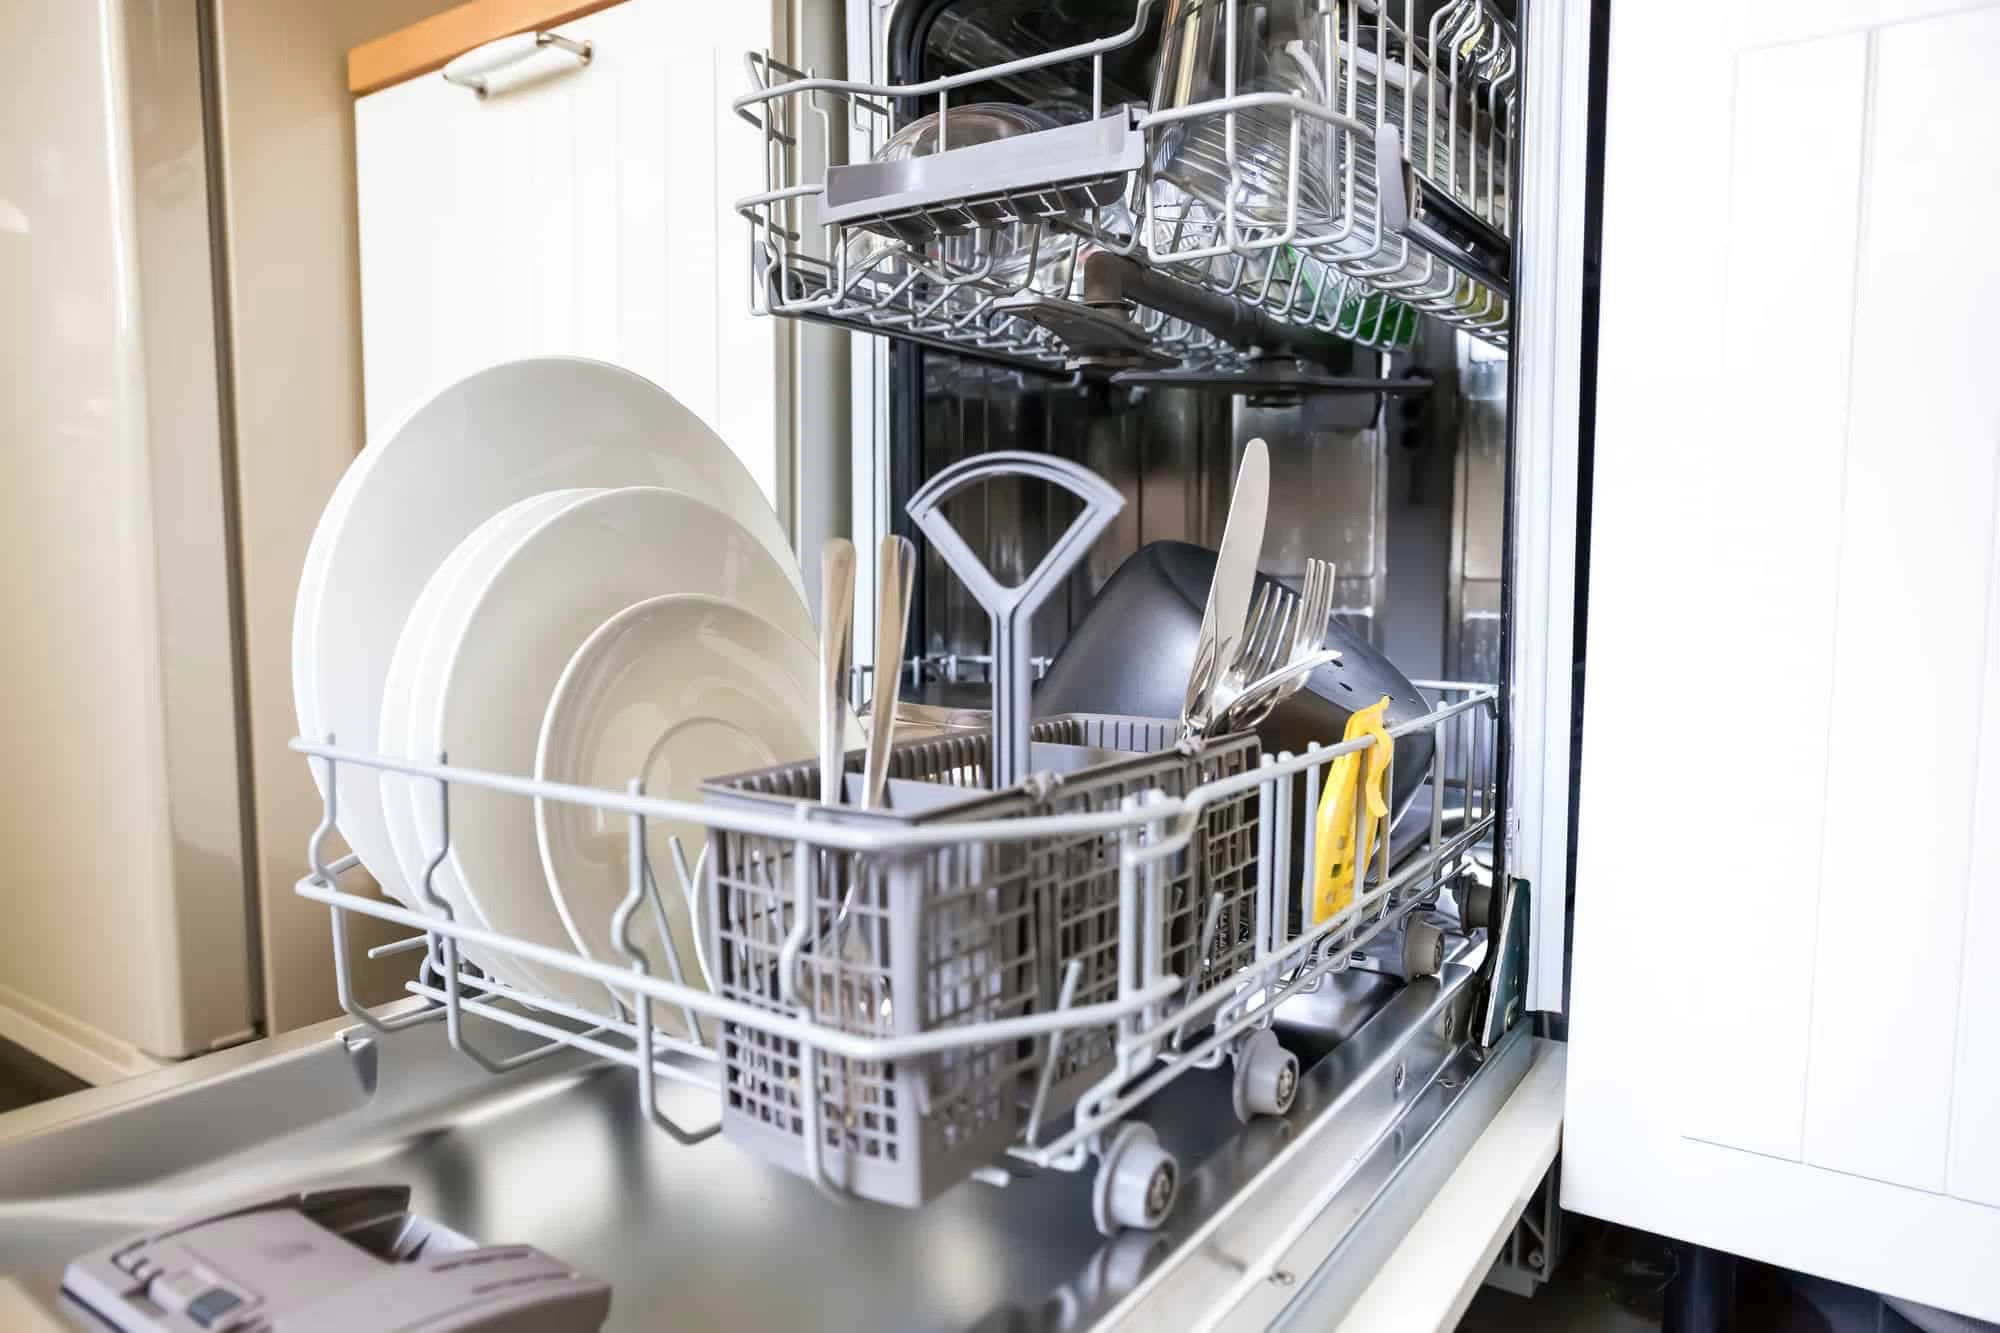 How To Fix The Error Code 45267 For Whirlpool Dishwasher